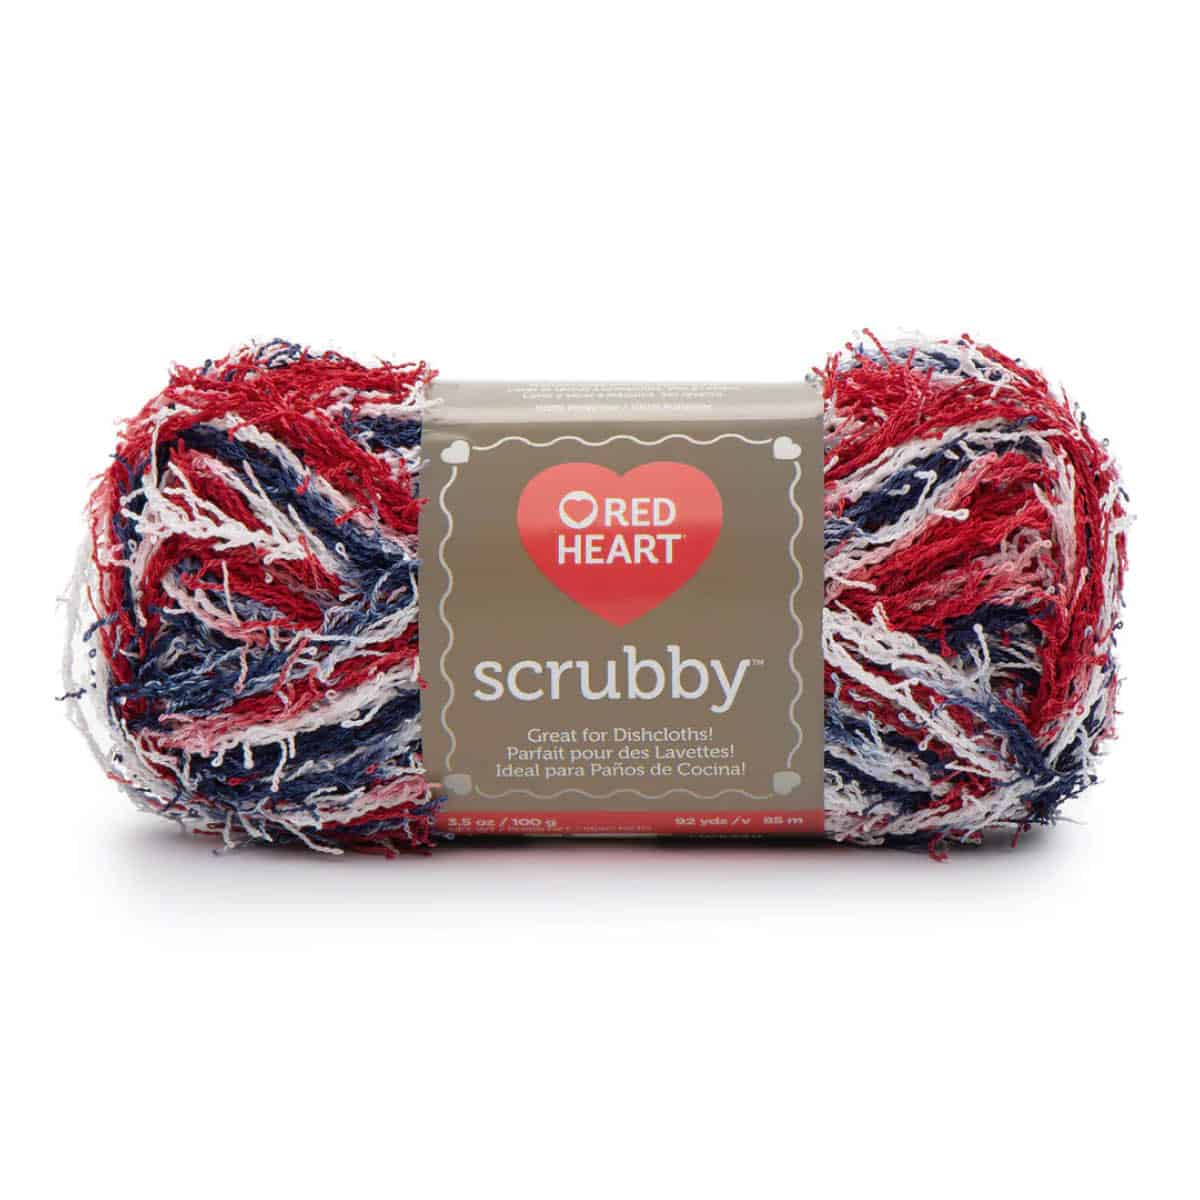 Red Heart Scrubby Yarn Product